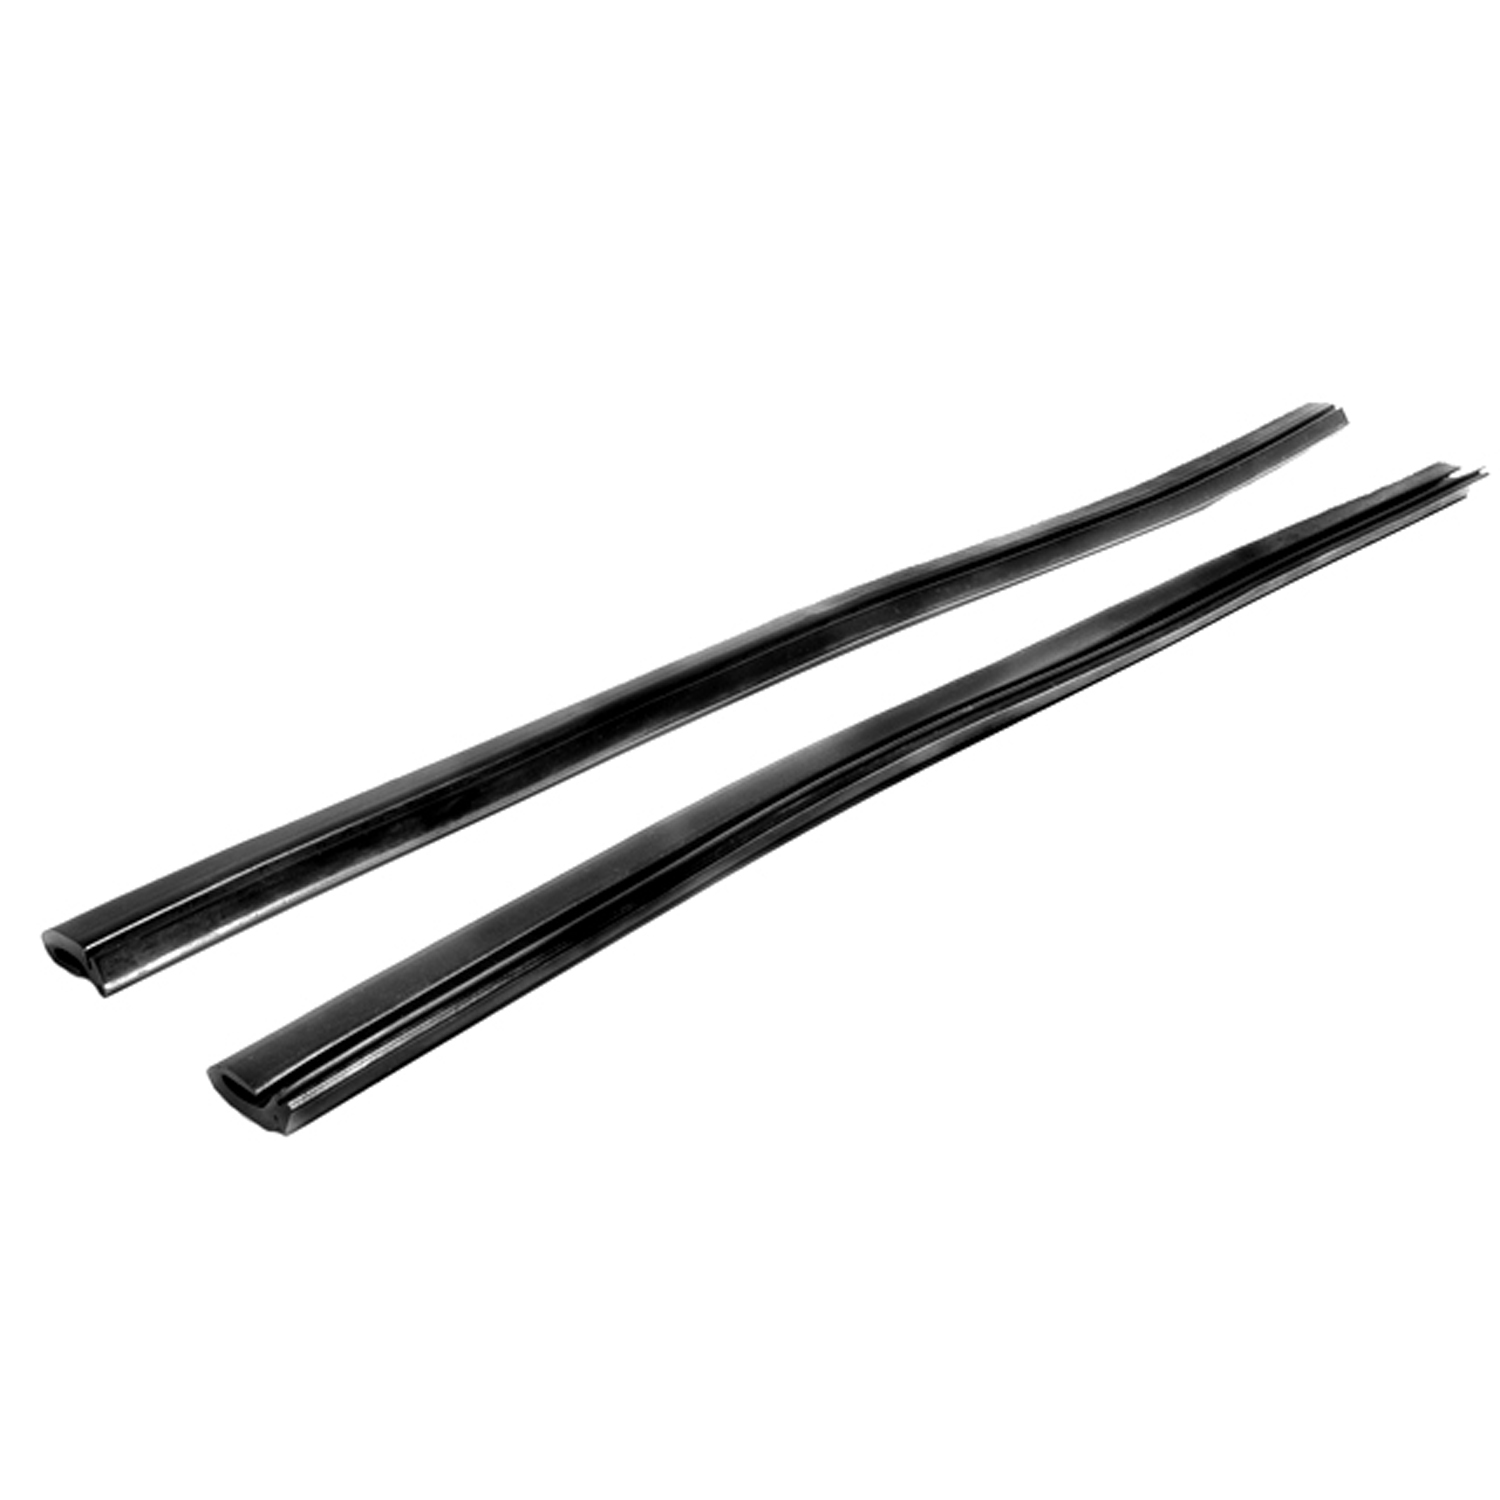 1969 Chevrolet Caprice Rear Side Roll-Up Window Seal, for Hardtops and Convertibles-VS 3